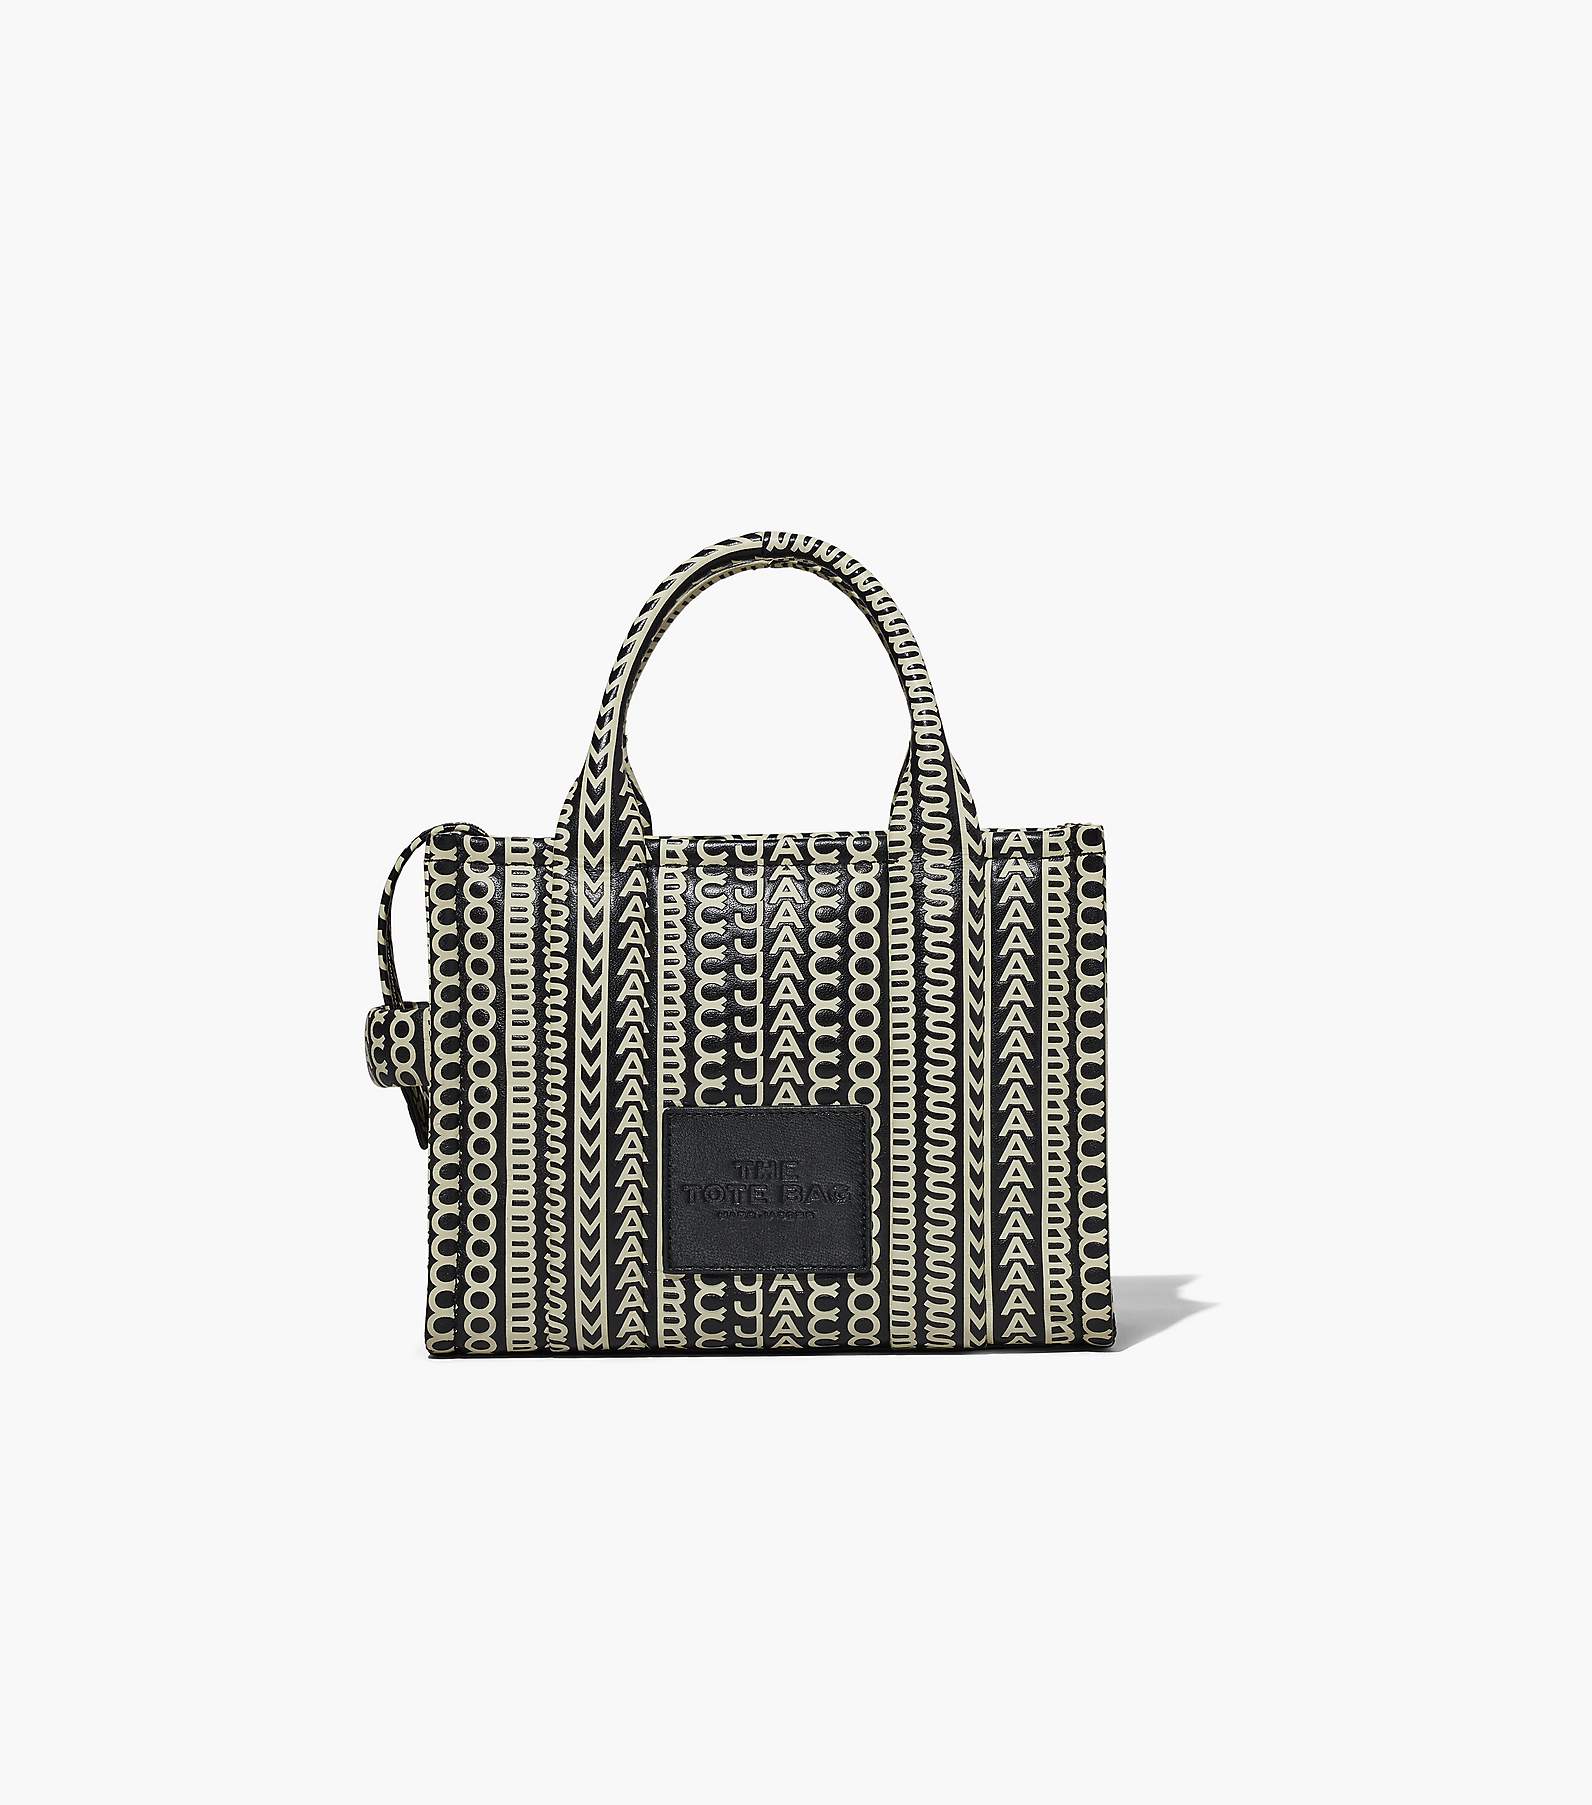 The Monogram Small Tote Bag, Marc Jacobs